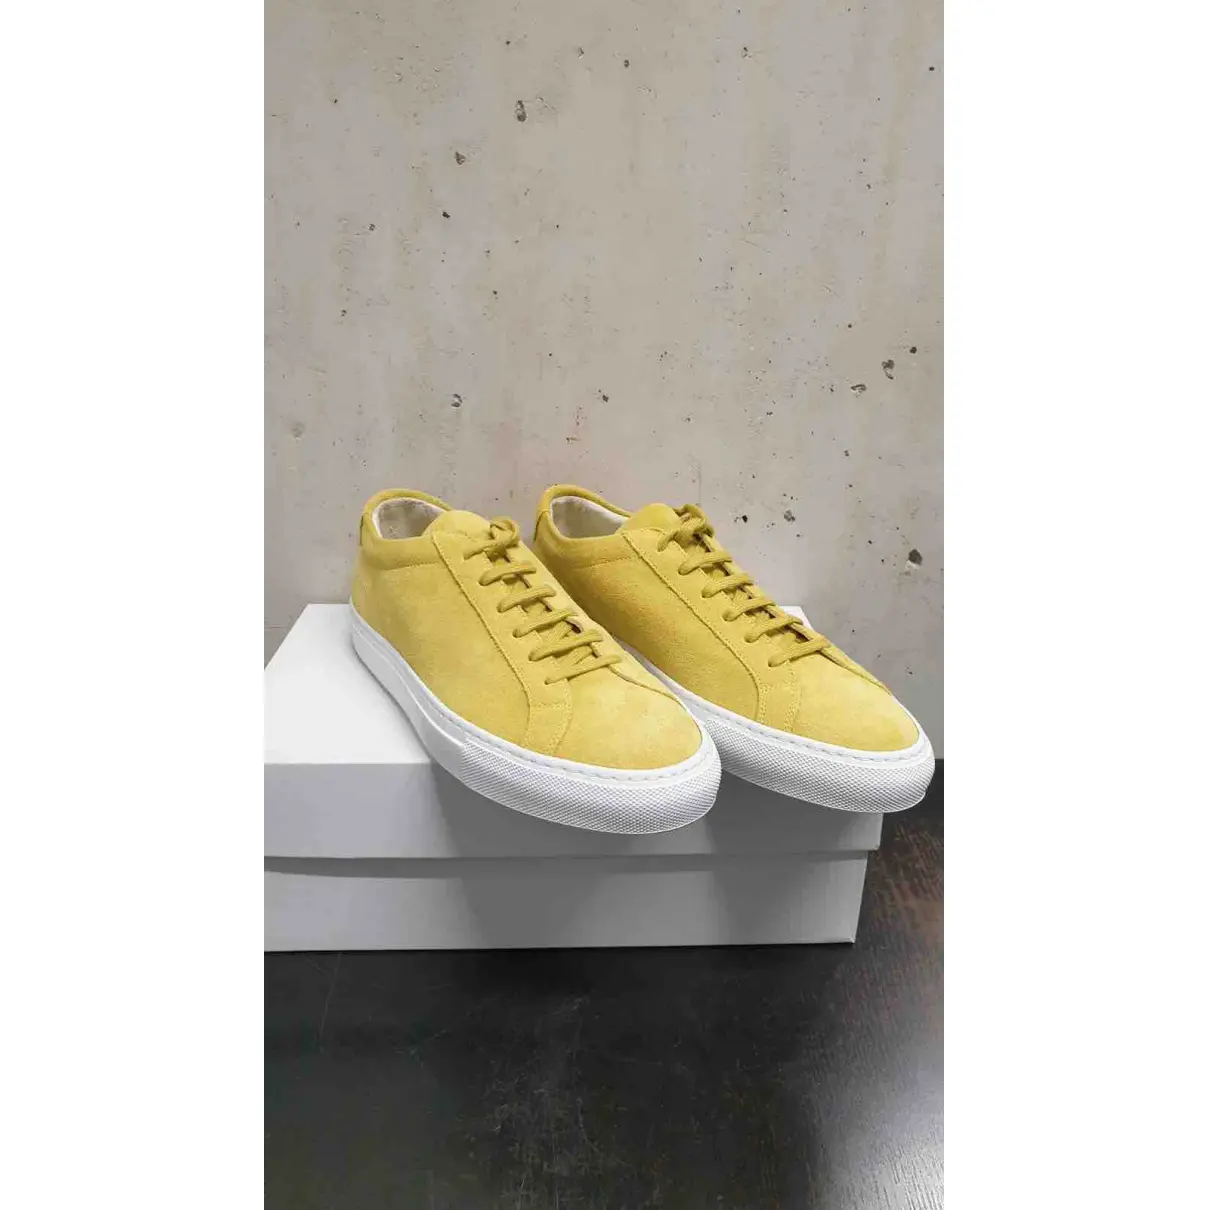 Buy Common Projects Trainers online